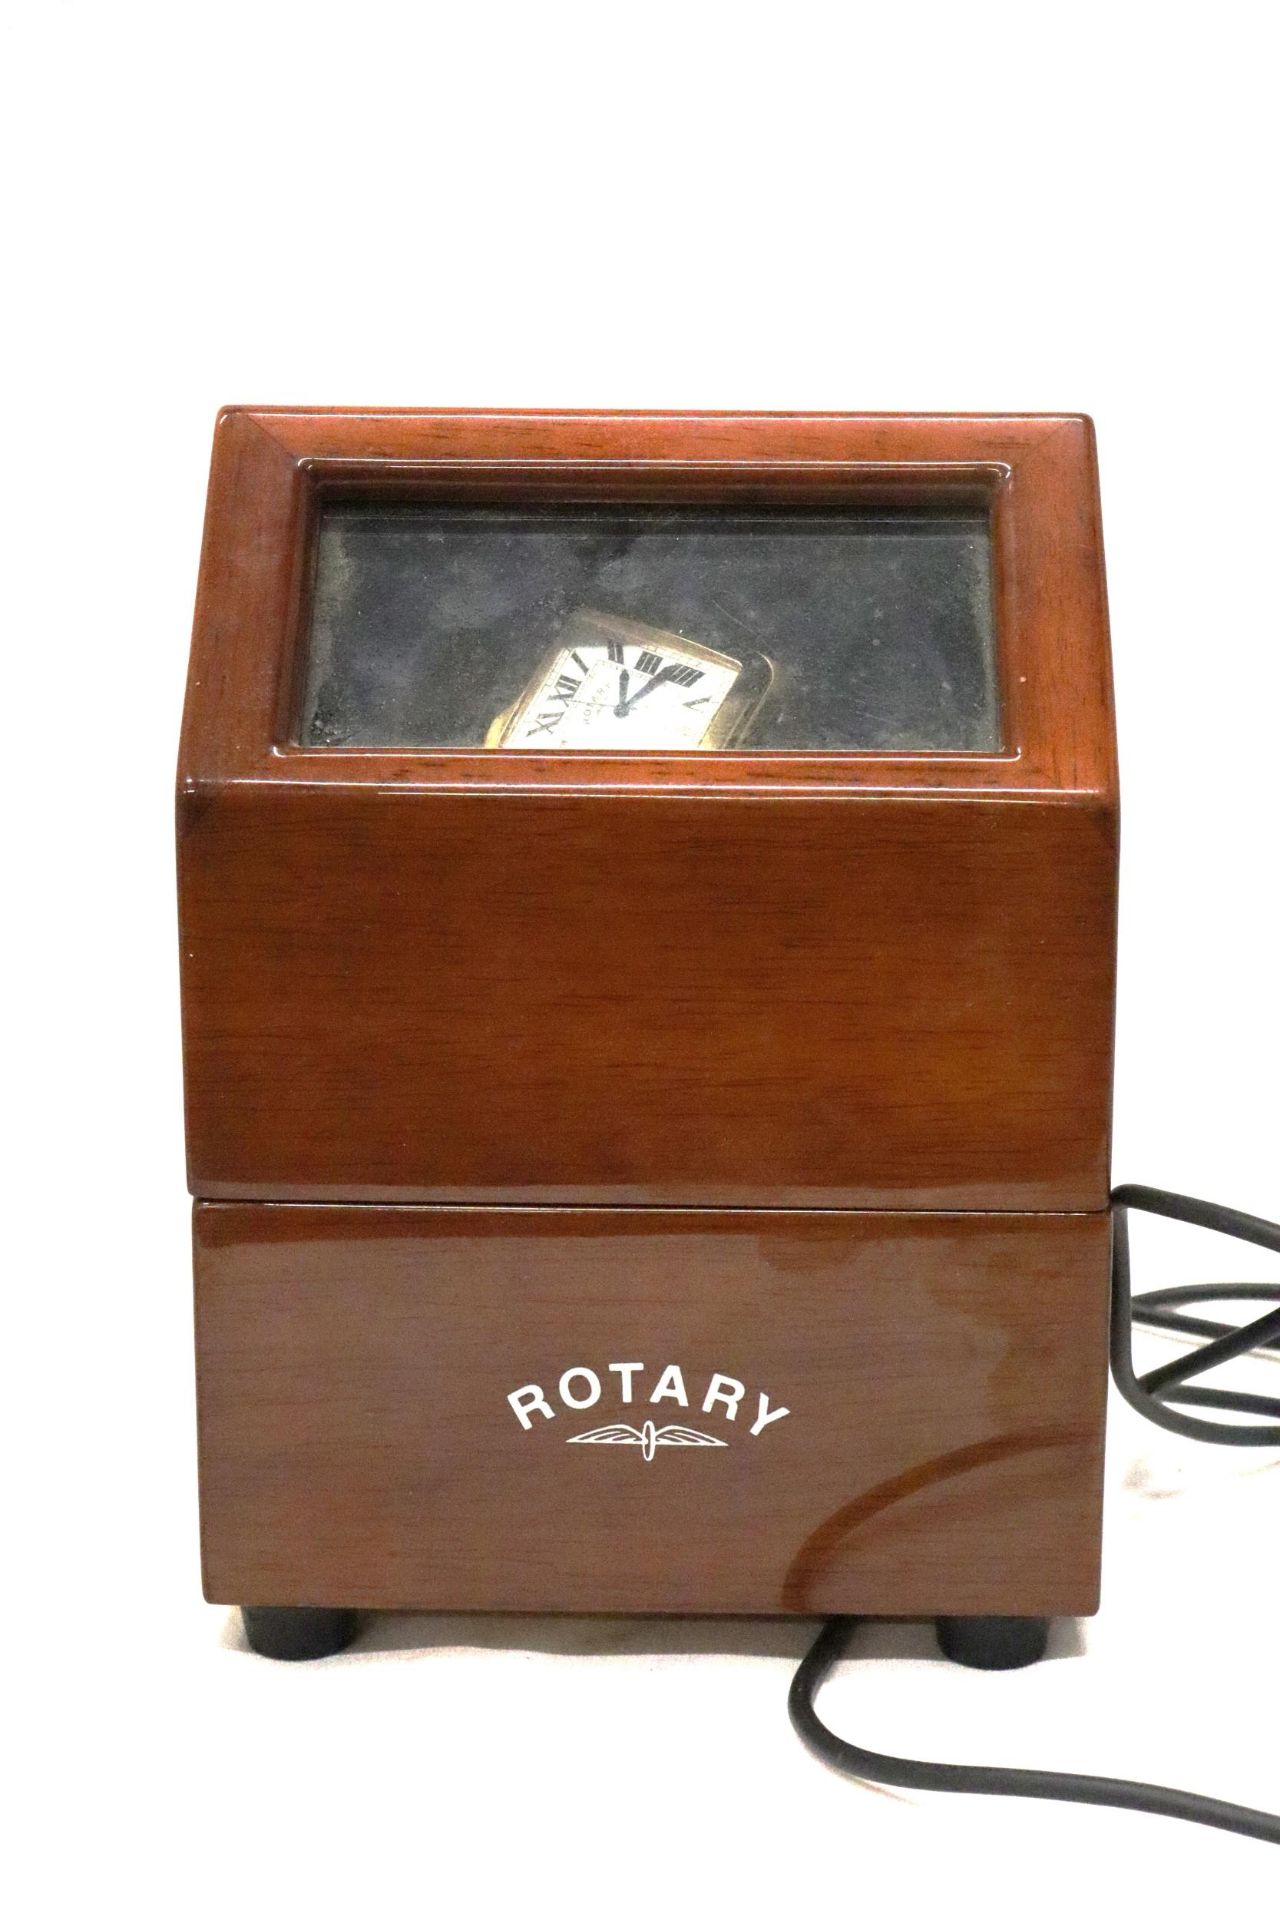 A ROTARY AUTOMATIC WRIST WATCH WITH SQUARE WHITE FACE, ROMAN NUMERALS AND A BLACK LEATHER STRAP - Image 2 of 7